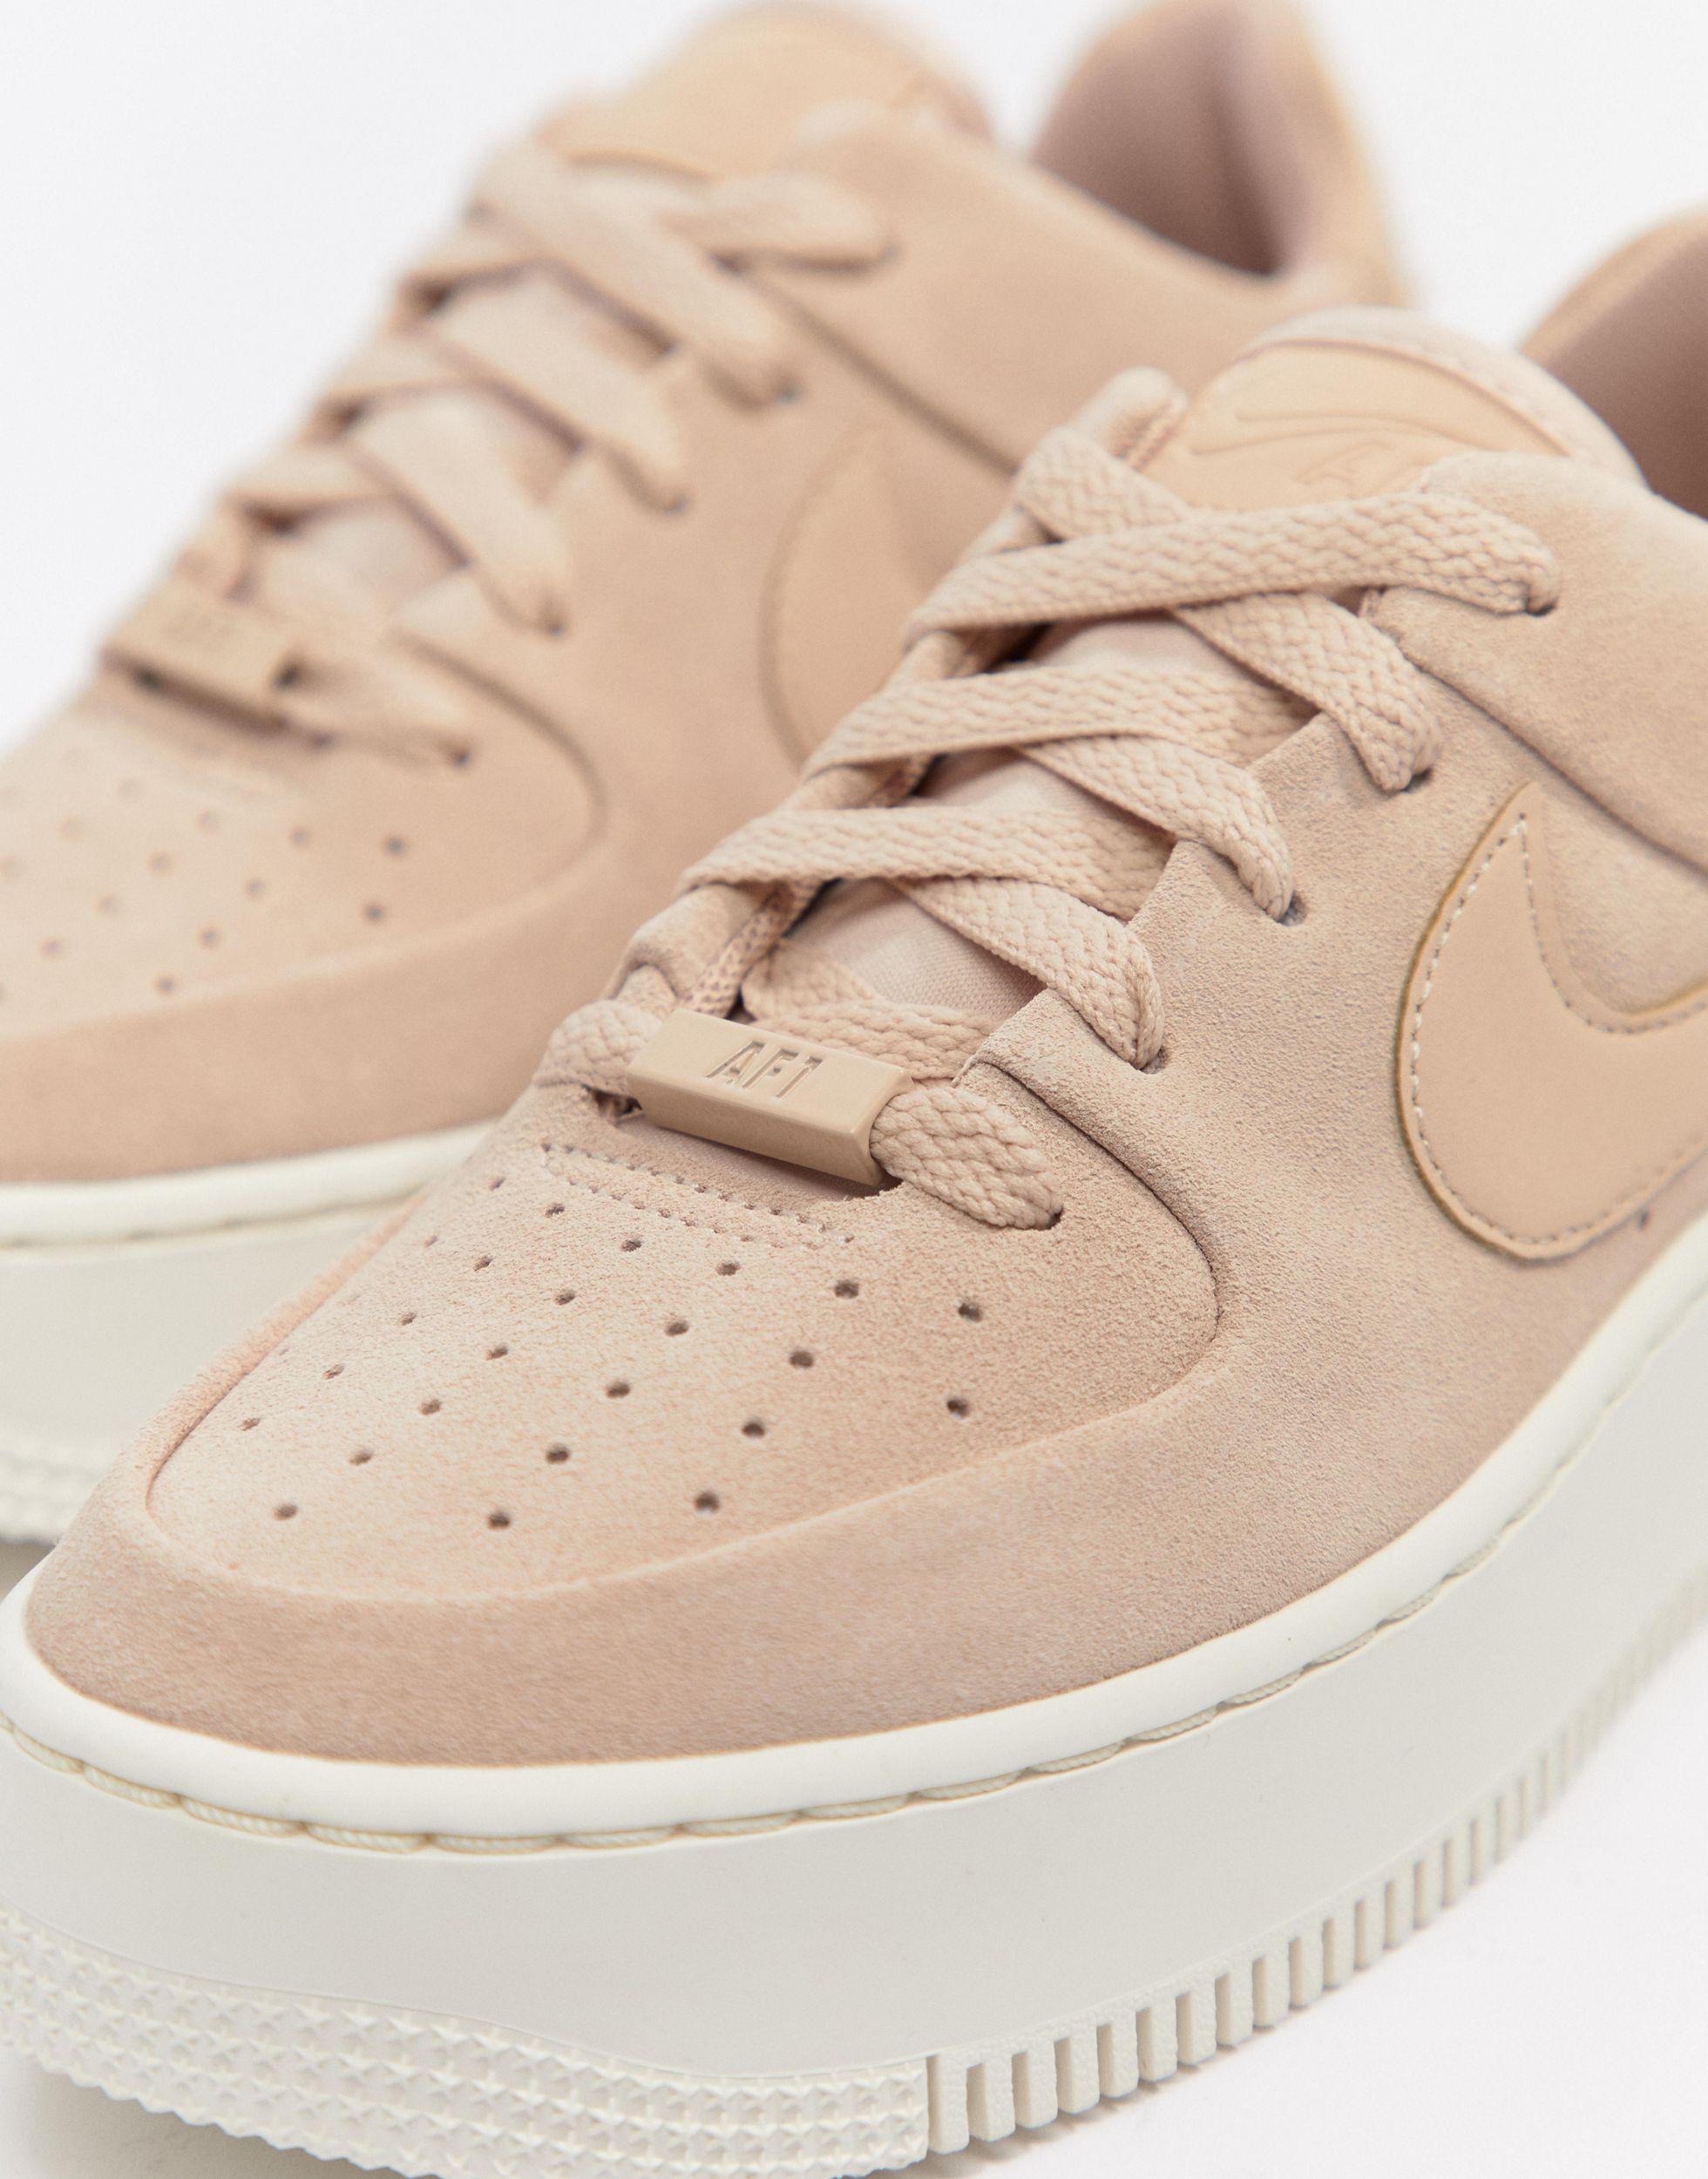 Nike Leather Air Force 1 Pixel Shoe in Pink (Natural) - Save 37% | Lyst